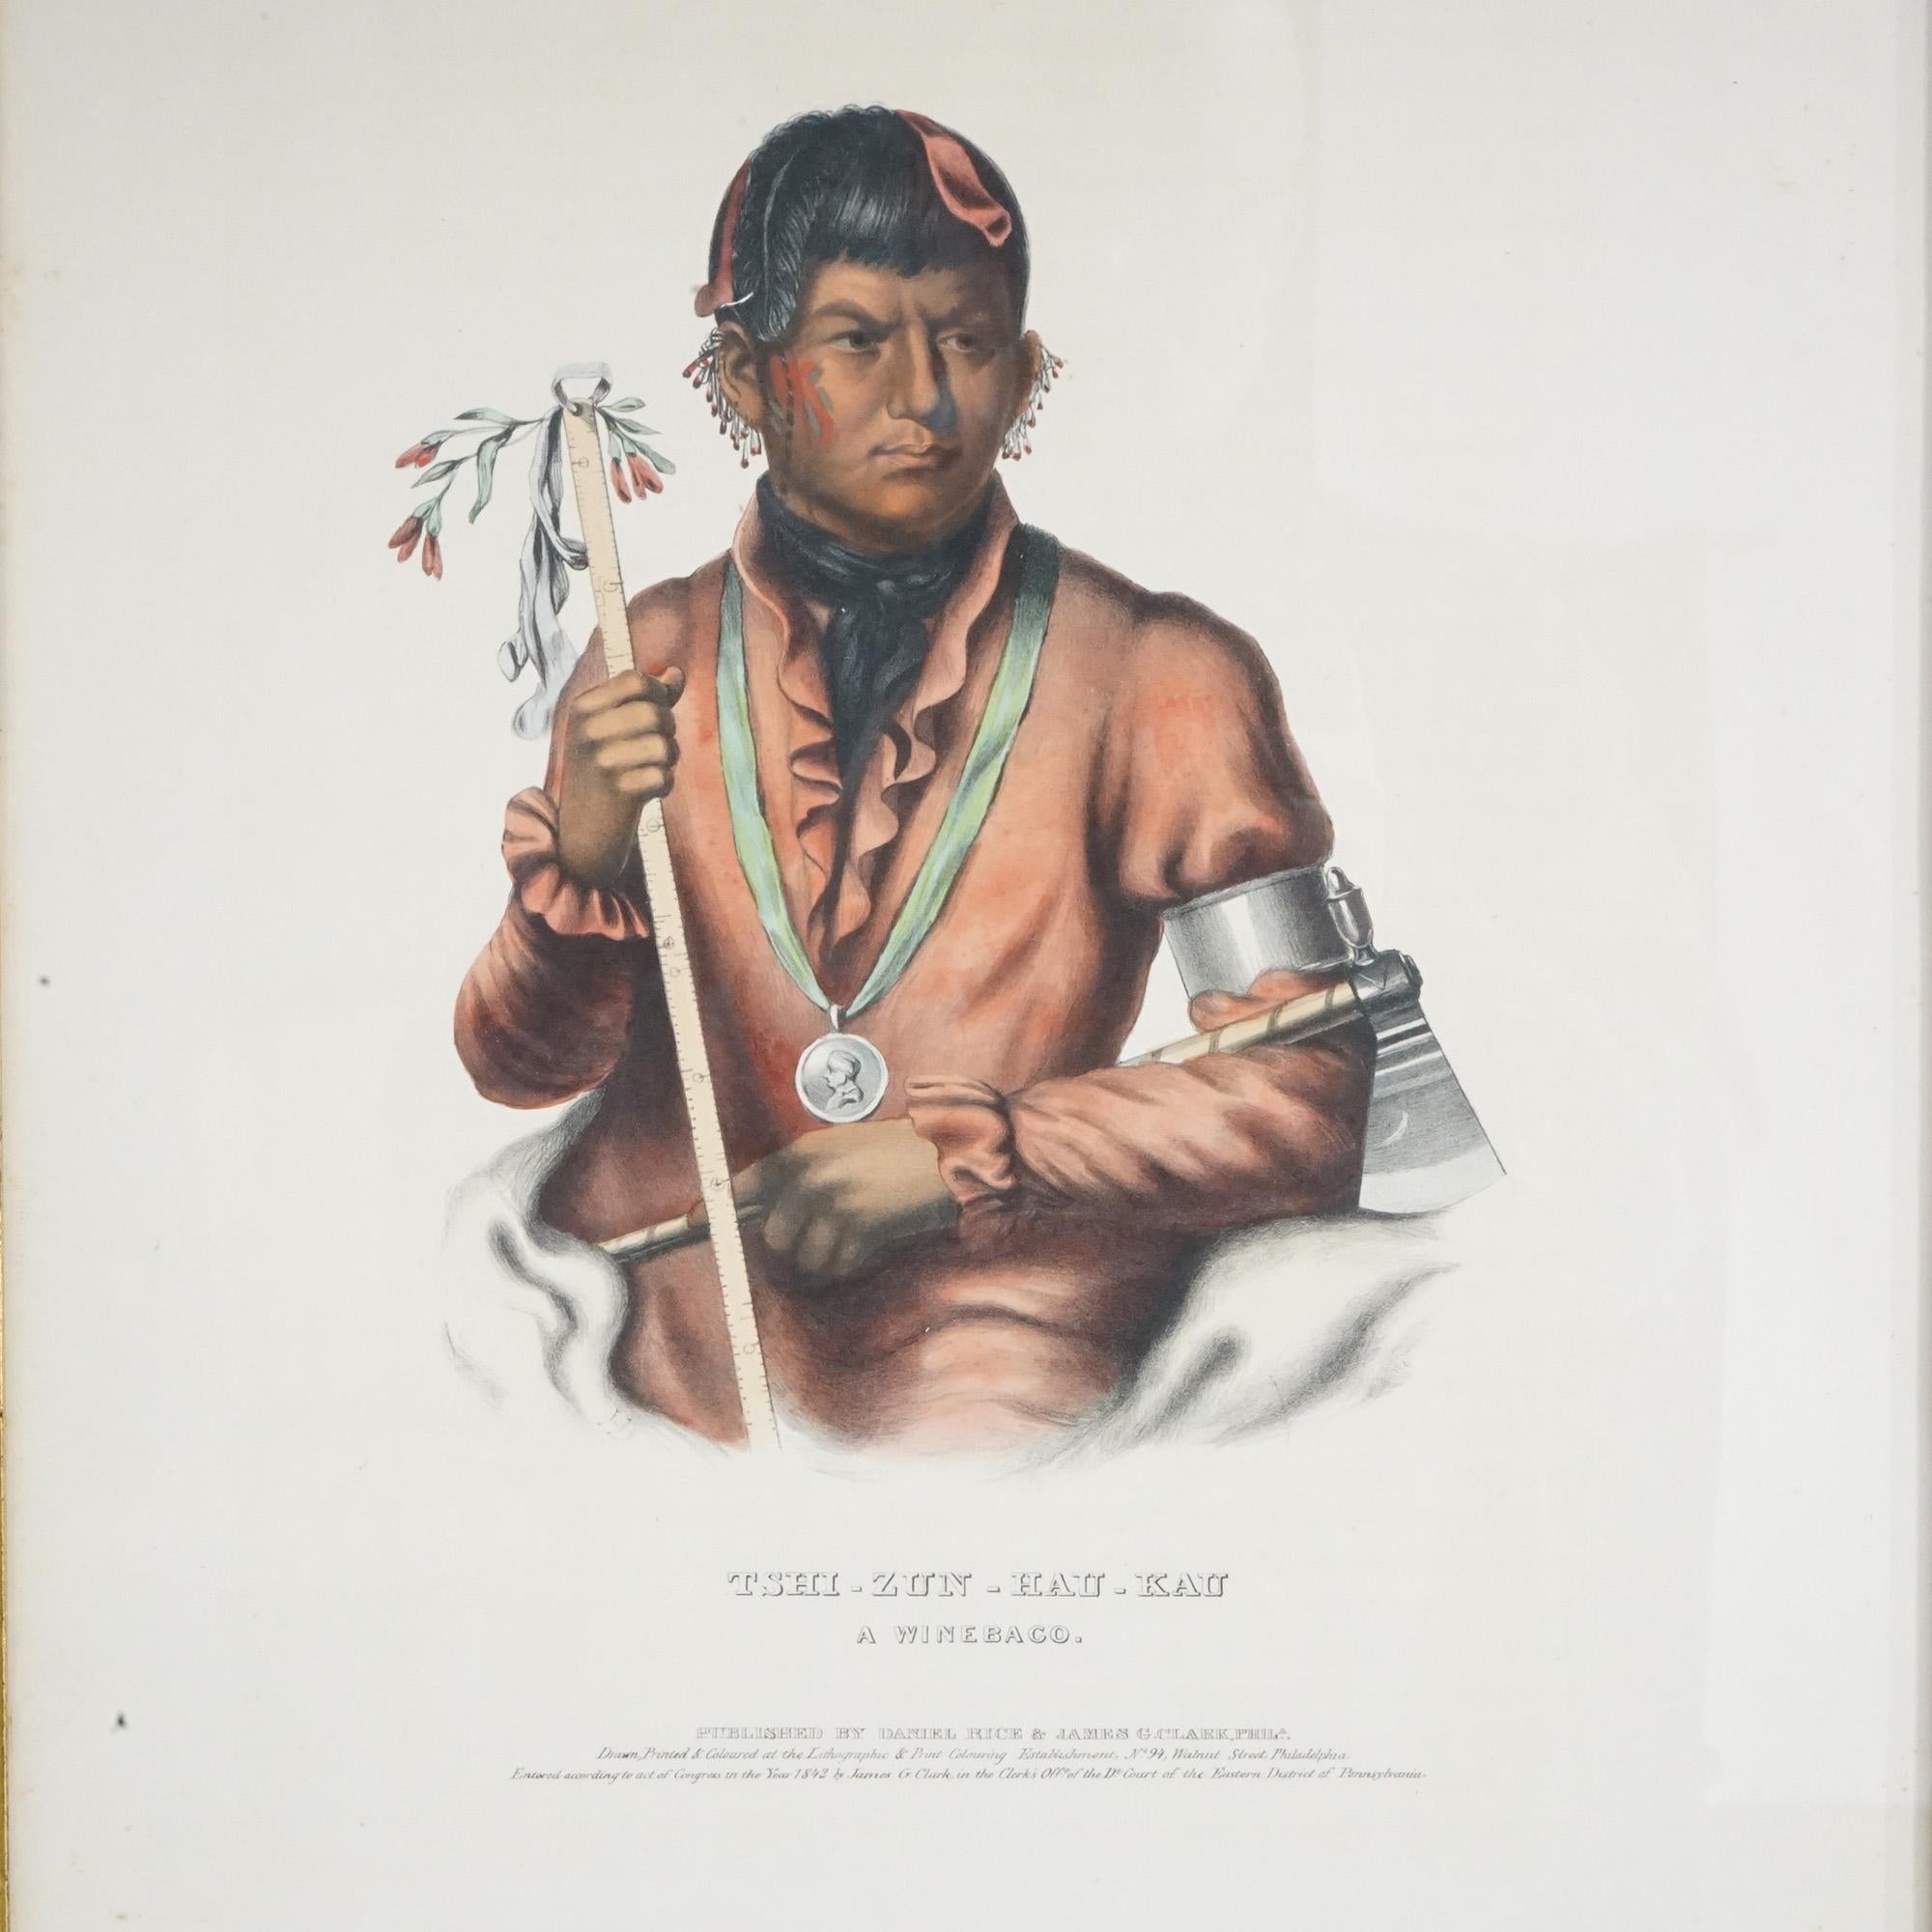 Antique American Indian Lithograph Published By Daniel Rice & James Clark Philadelphia, Framed, 19th century.

Measures- 21.5''H x 15.5''W x 1''D; 12.5'' x 19.5'' sight.